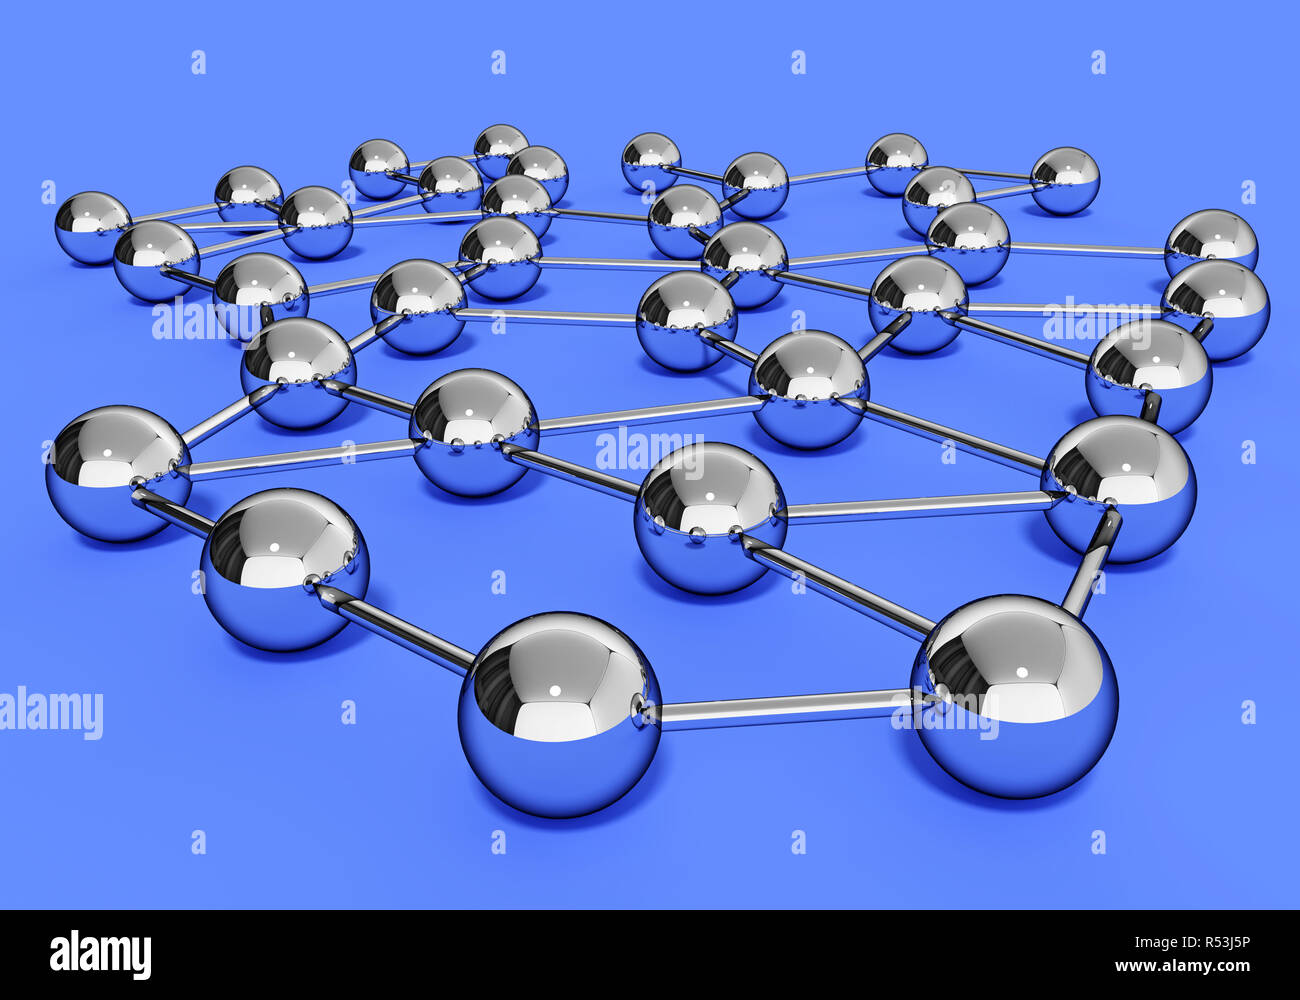 Network connections. Chrome knots on a blue background. 3d render illustration. Stock Photo